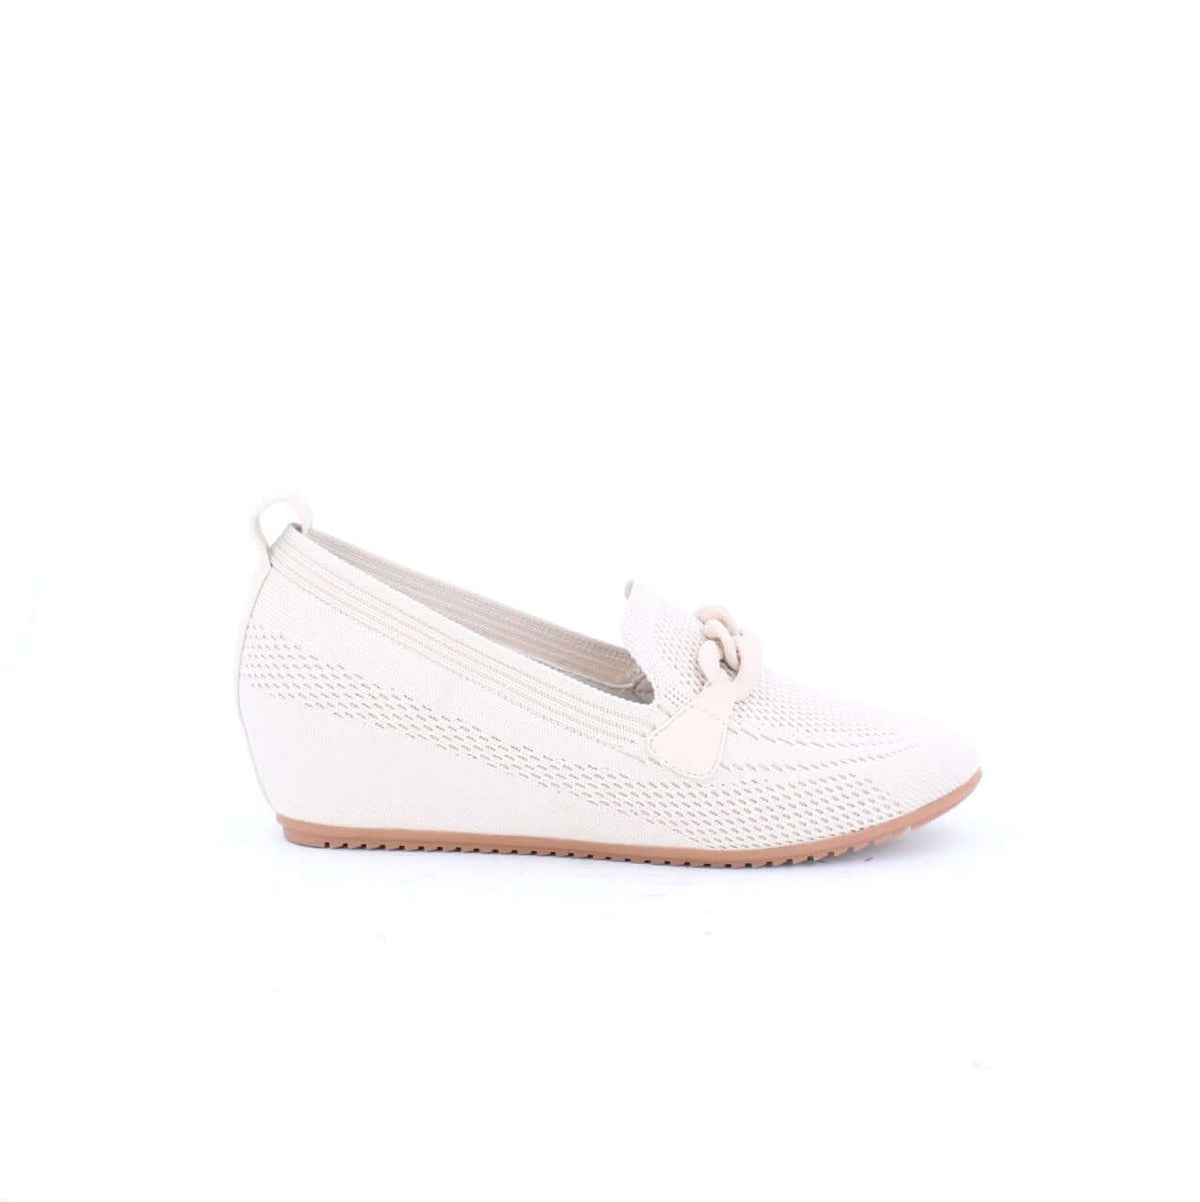 ANGIEWEDGEMOC-LOAFERS & MOCCASINS-WEDGES-BEIGE/NATURAL